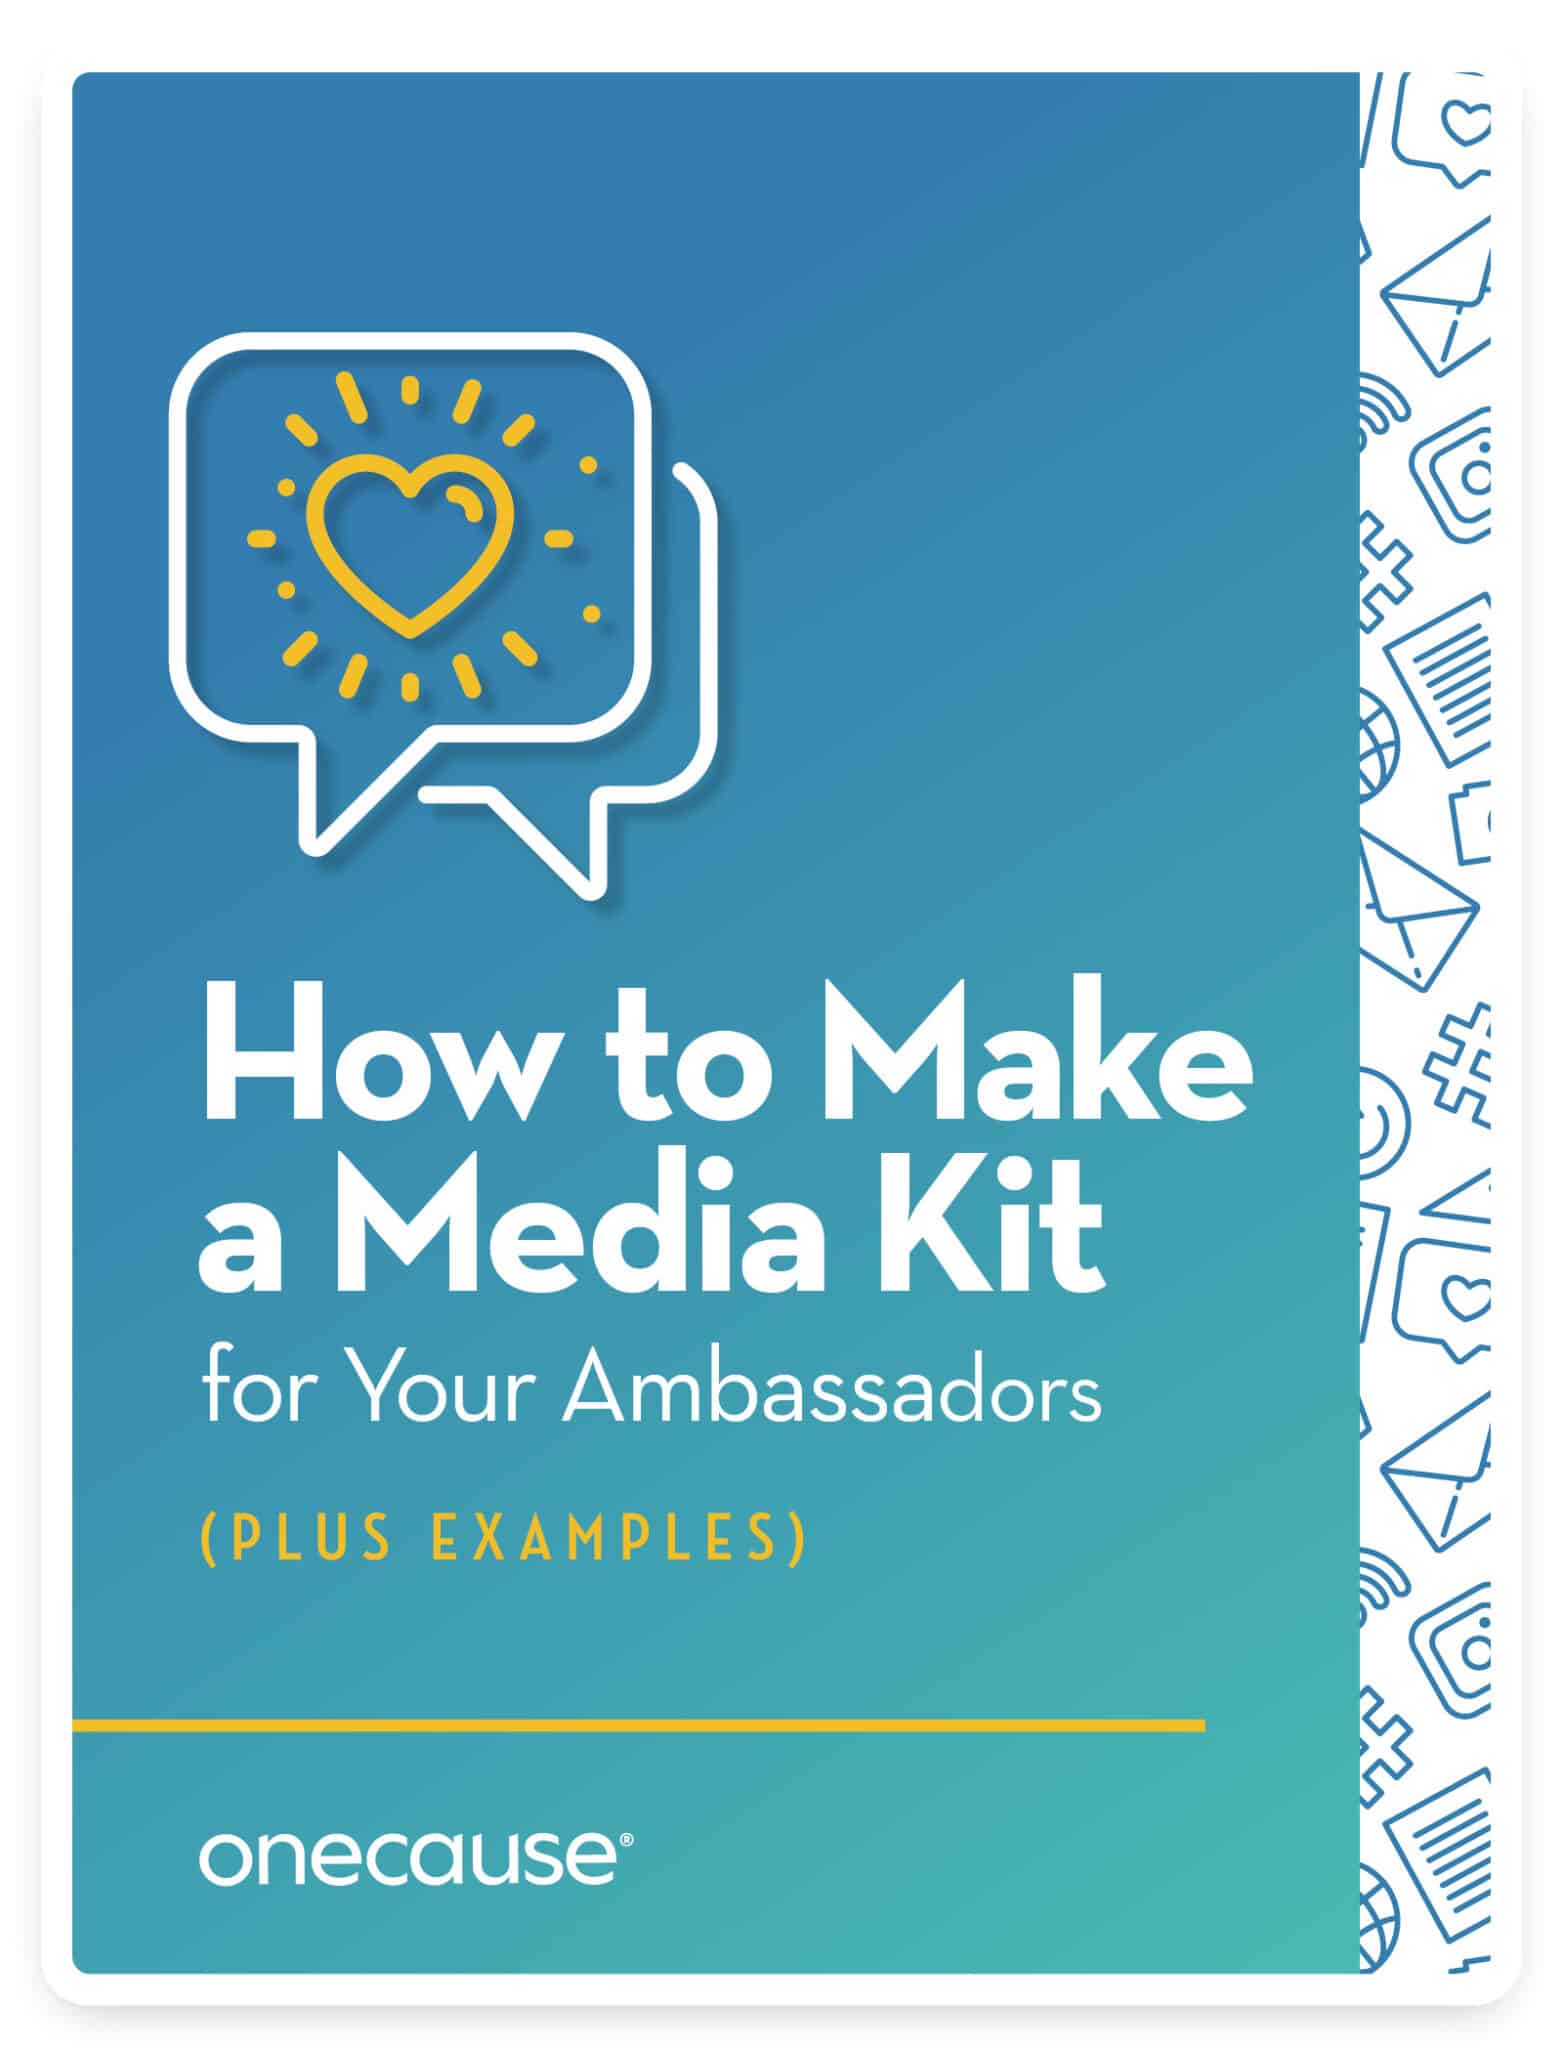 How to Make a Media Kit for Your Ambassadors